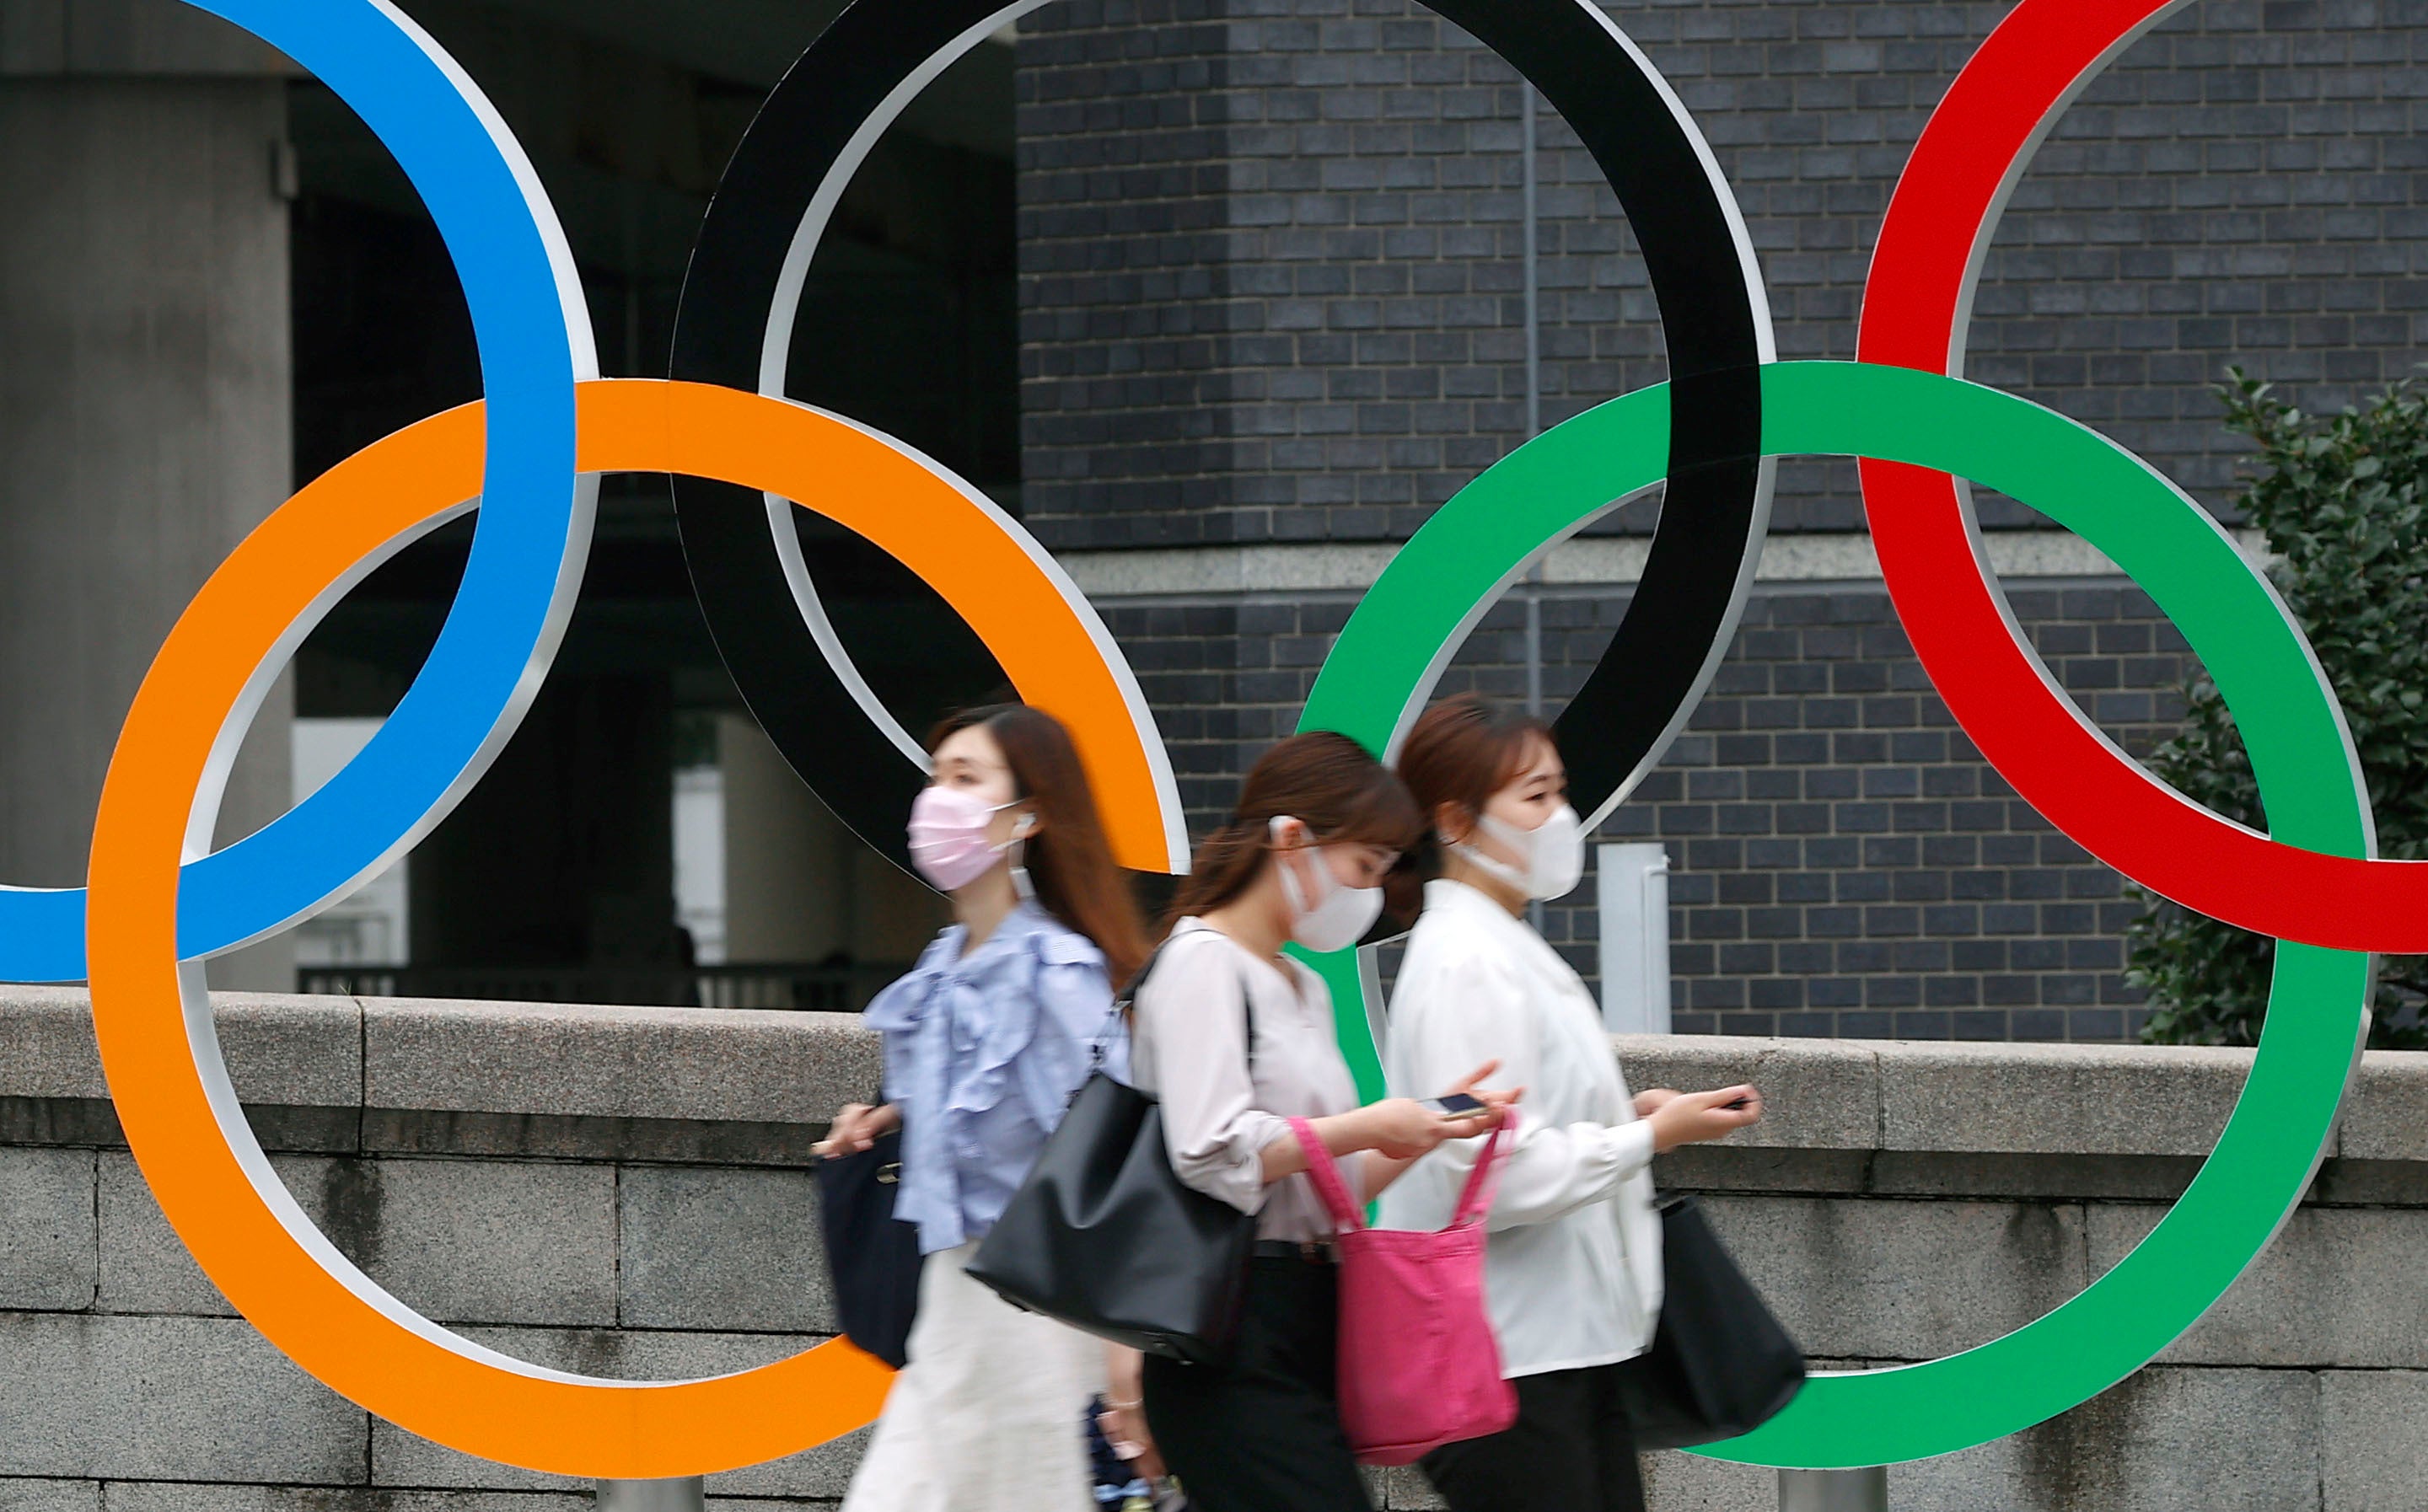 People wearing face masks walk past the Olympics Rings statue in Tokyo on 8 July 2021